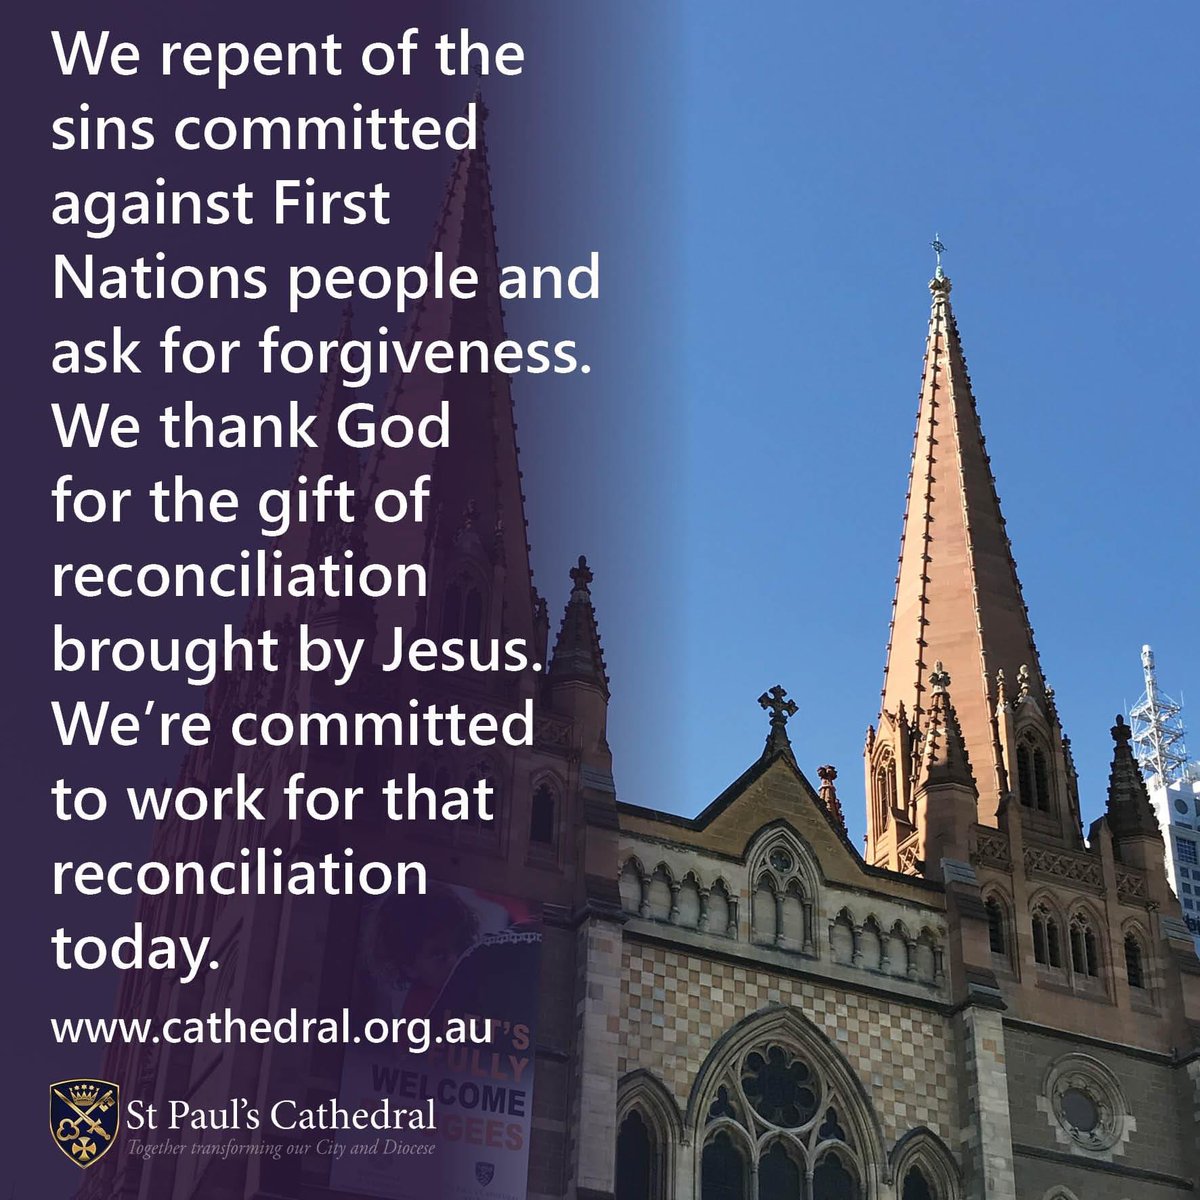 We repent of the sins committed against First Nations People and ask for forgiveness. We thank God for the gift of reconciliation brought by Jesus. We’re committed to work for that reconciliation today.
#AboriginalSovereignty #AustraliaDay #Reconciliation #AlwaysWasAlwaysWillBe